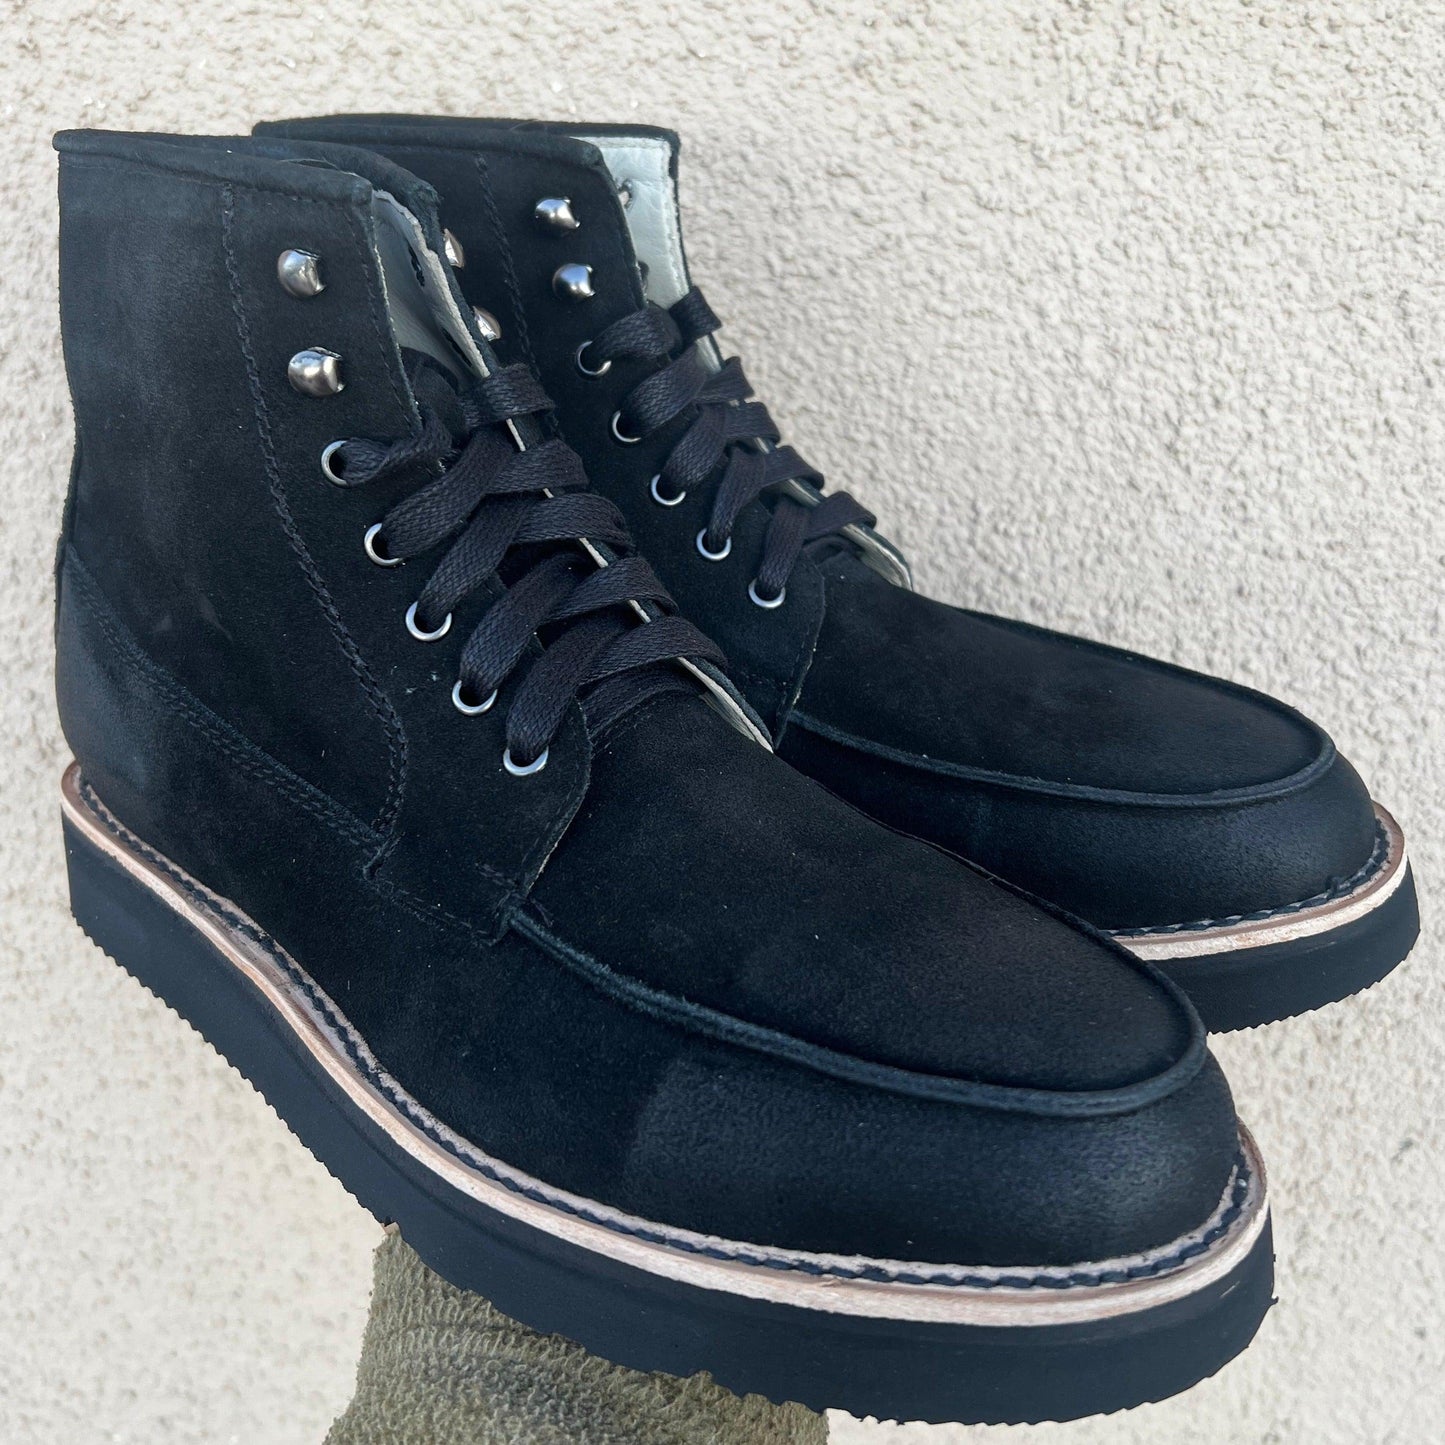 Waxed Suede Midnight Nomad Size 9 Item # 0779 - DIEVIER